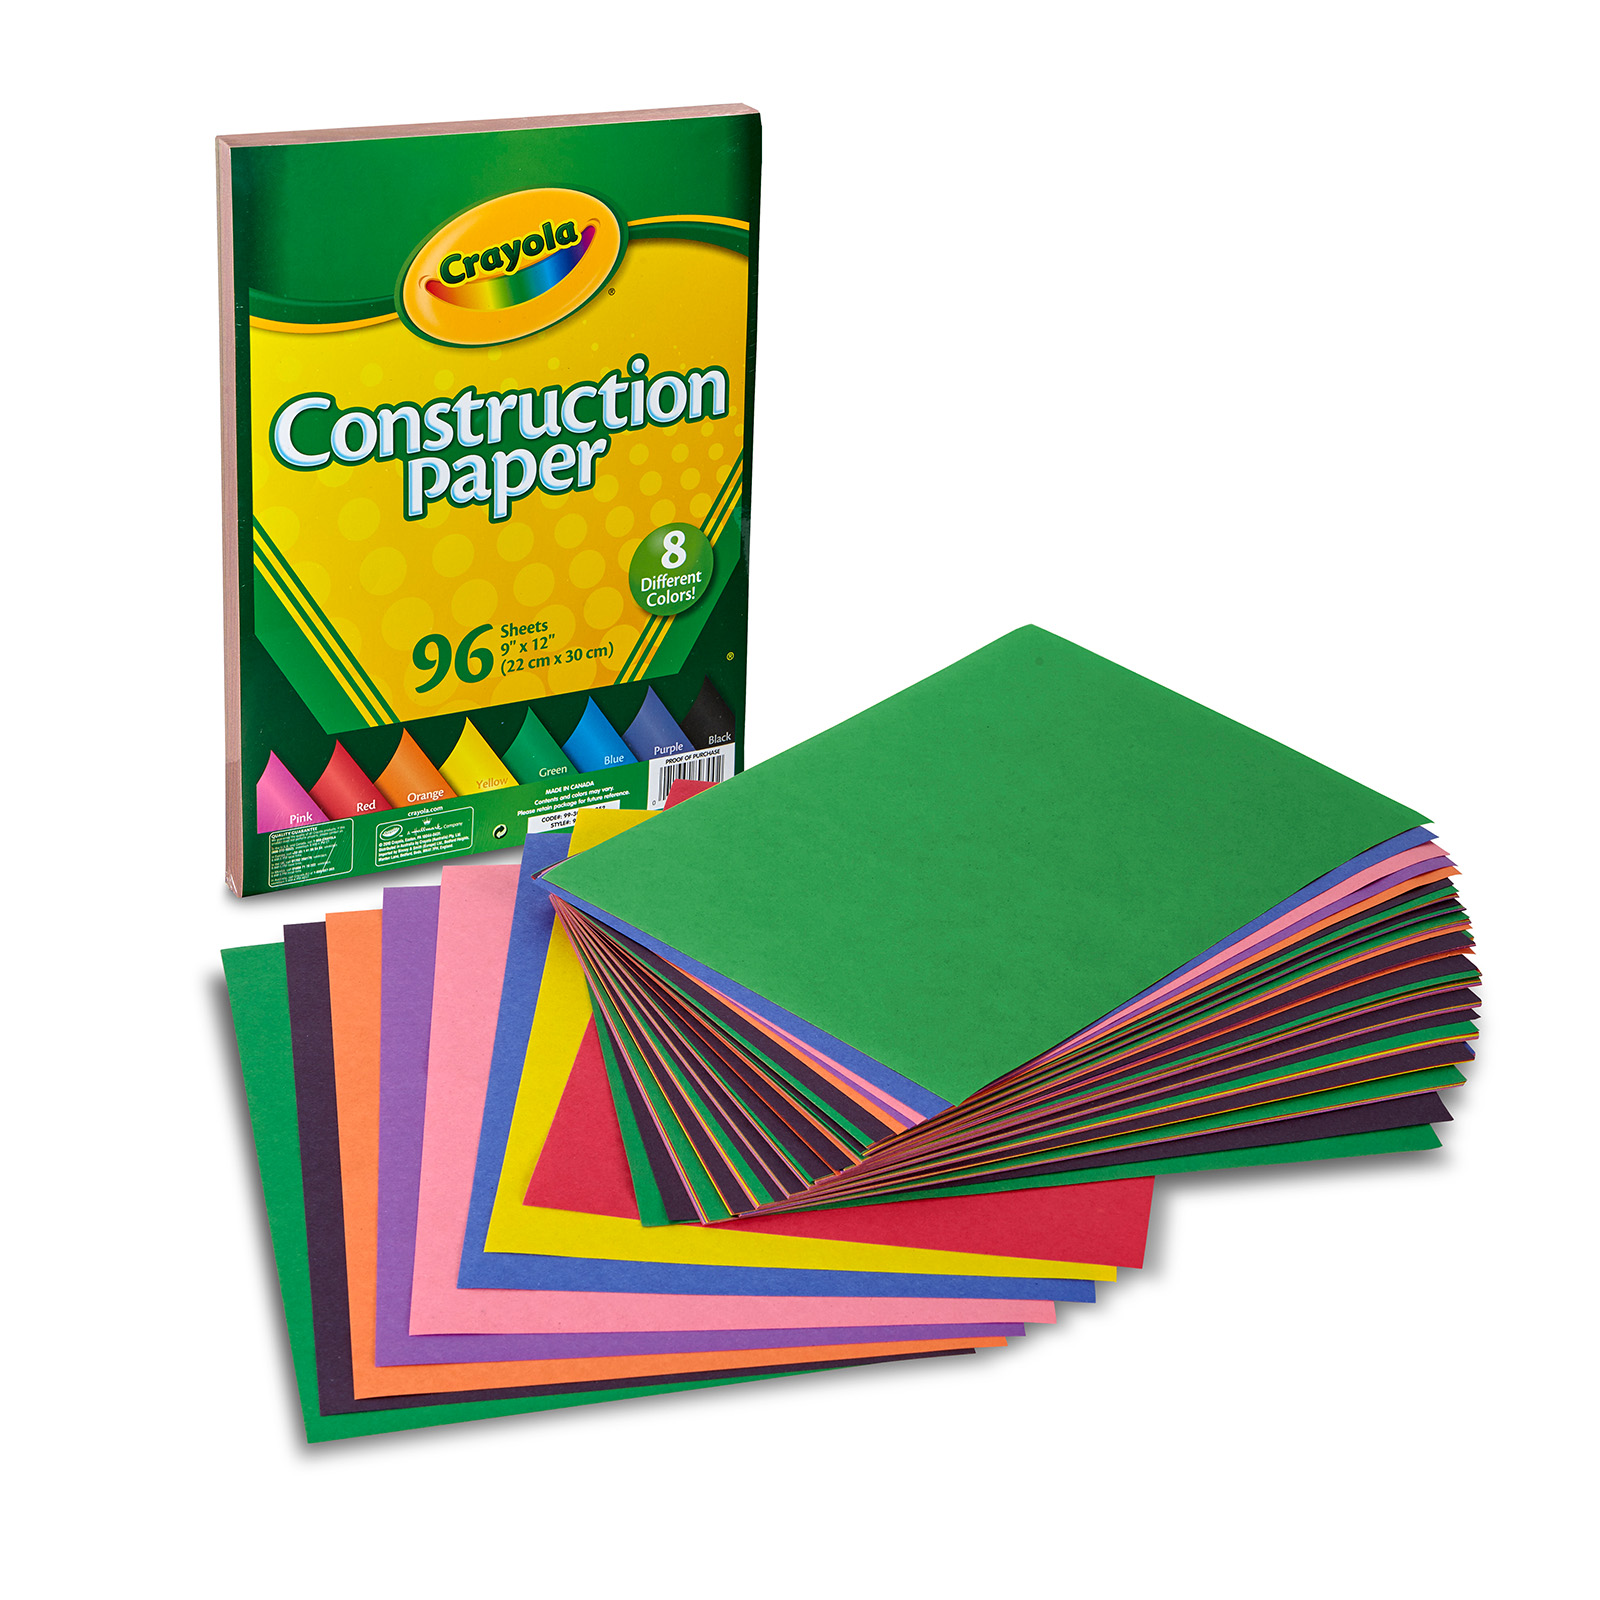 Purchase newly constructed papers website